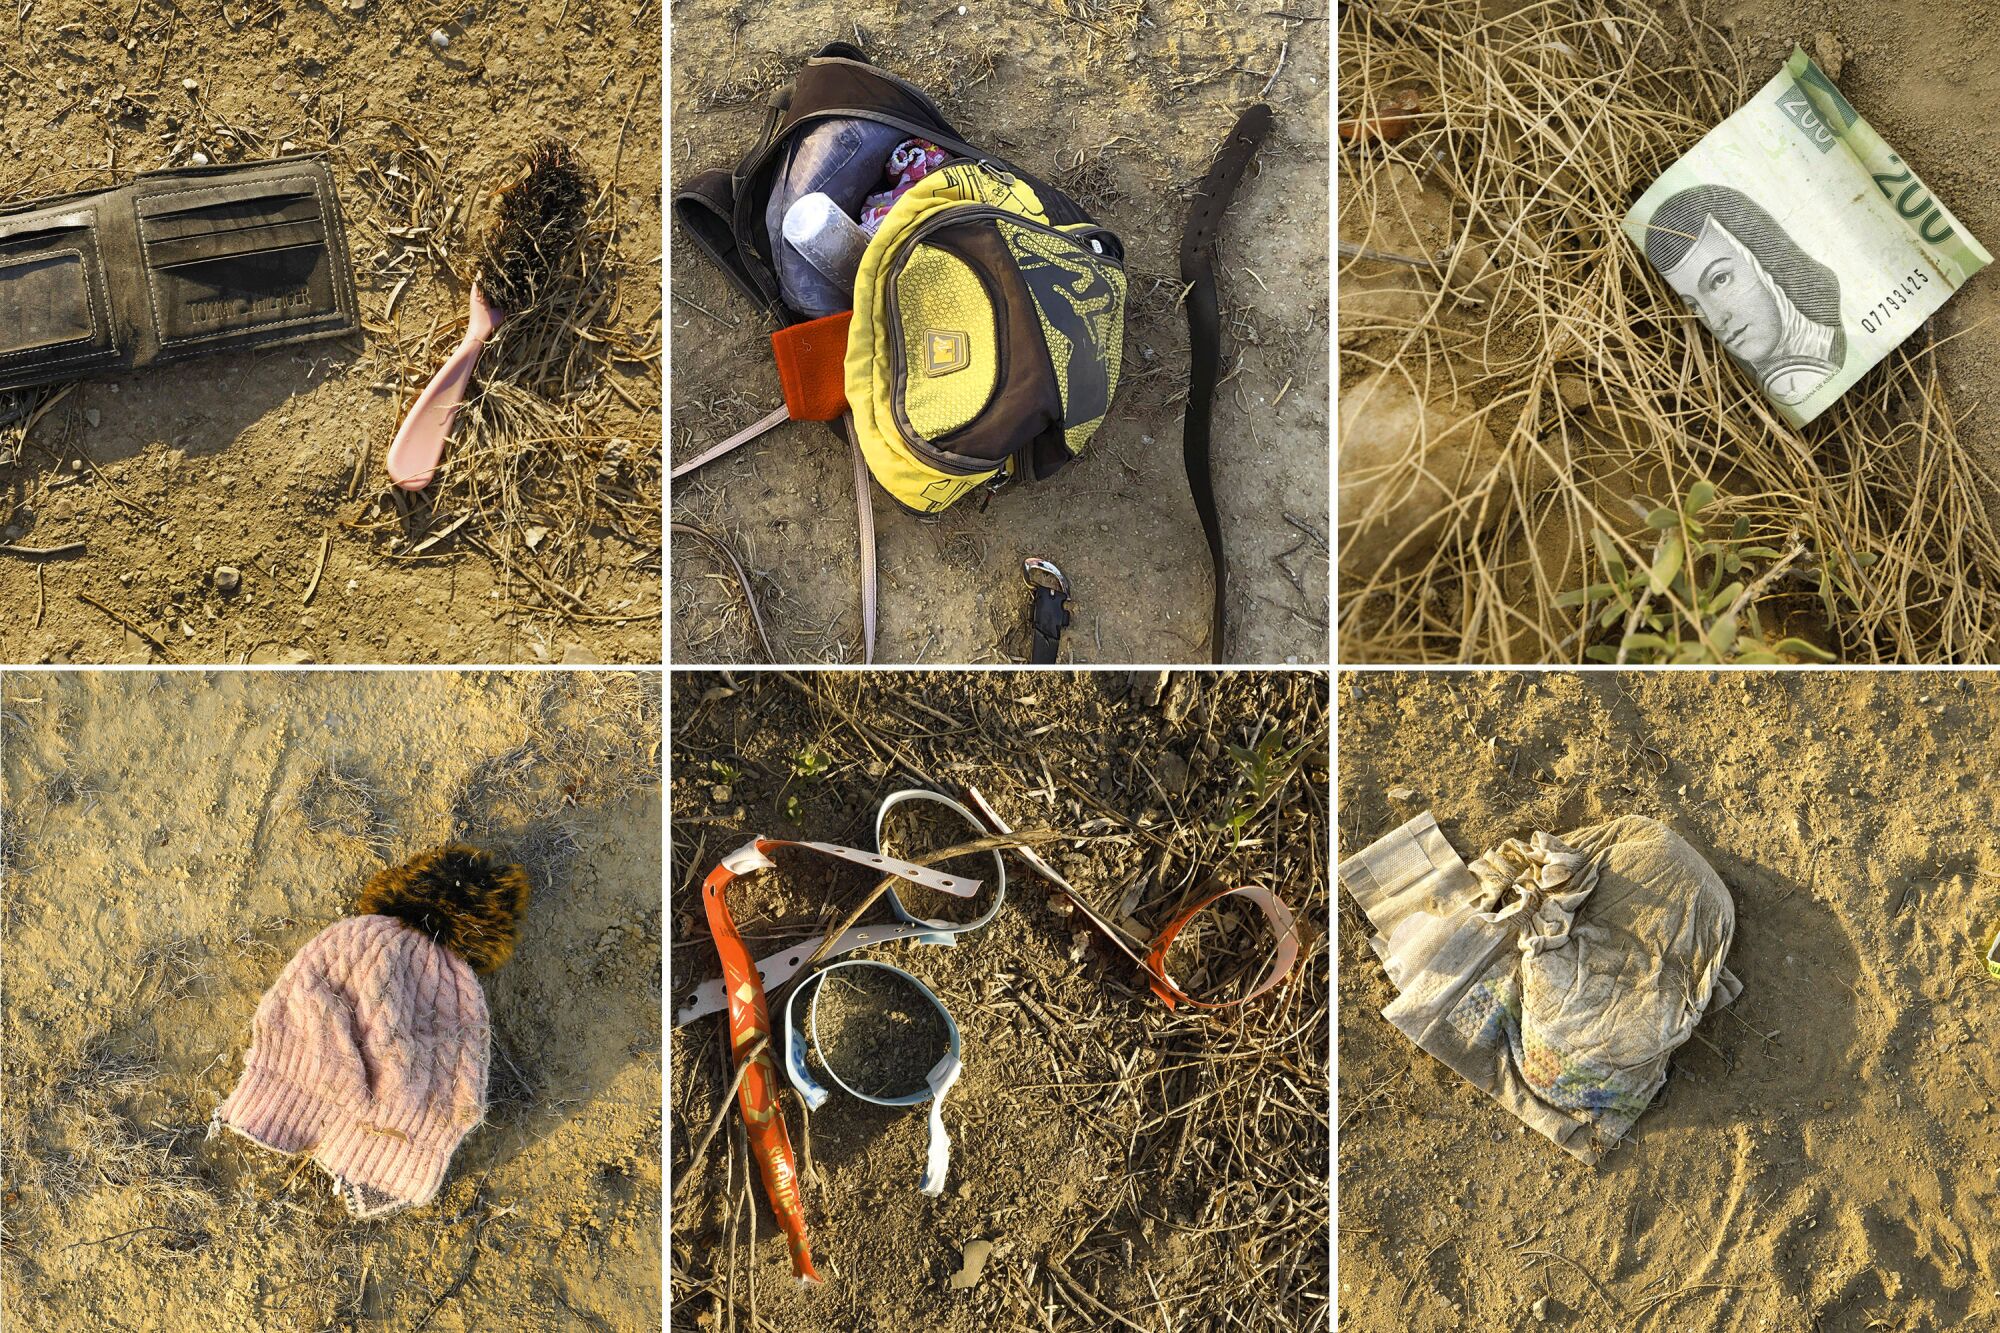 Collage of six photos of items like wallets, brushes, bags, diapers, hats, wristbands and money lying in the dirt